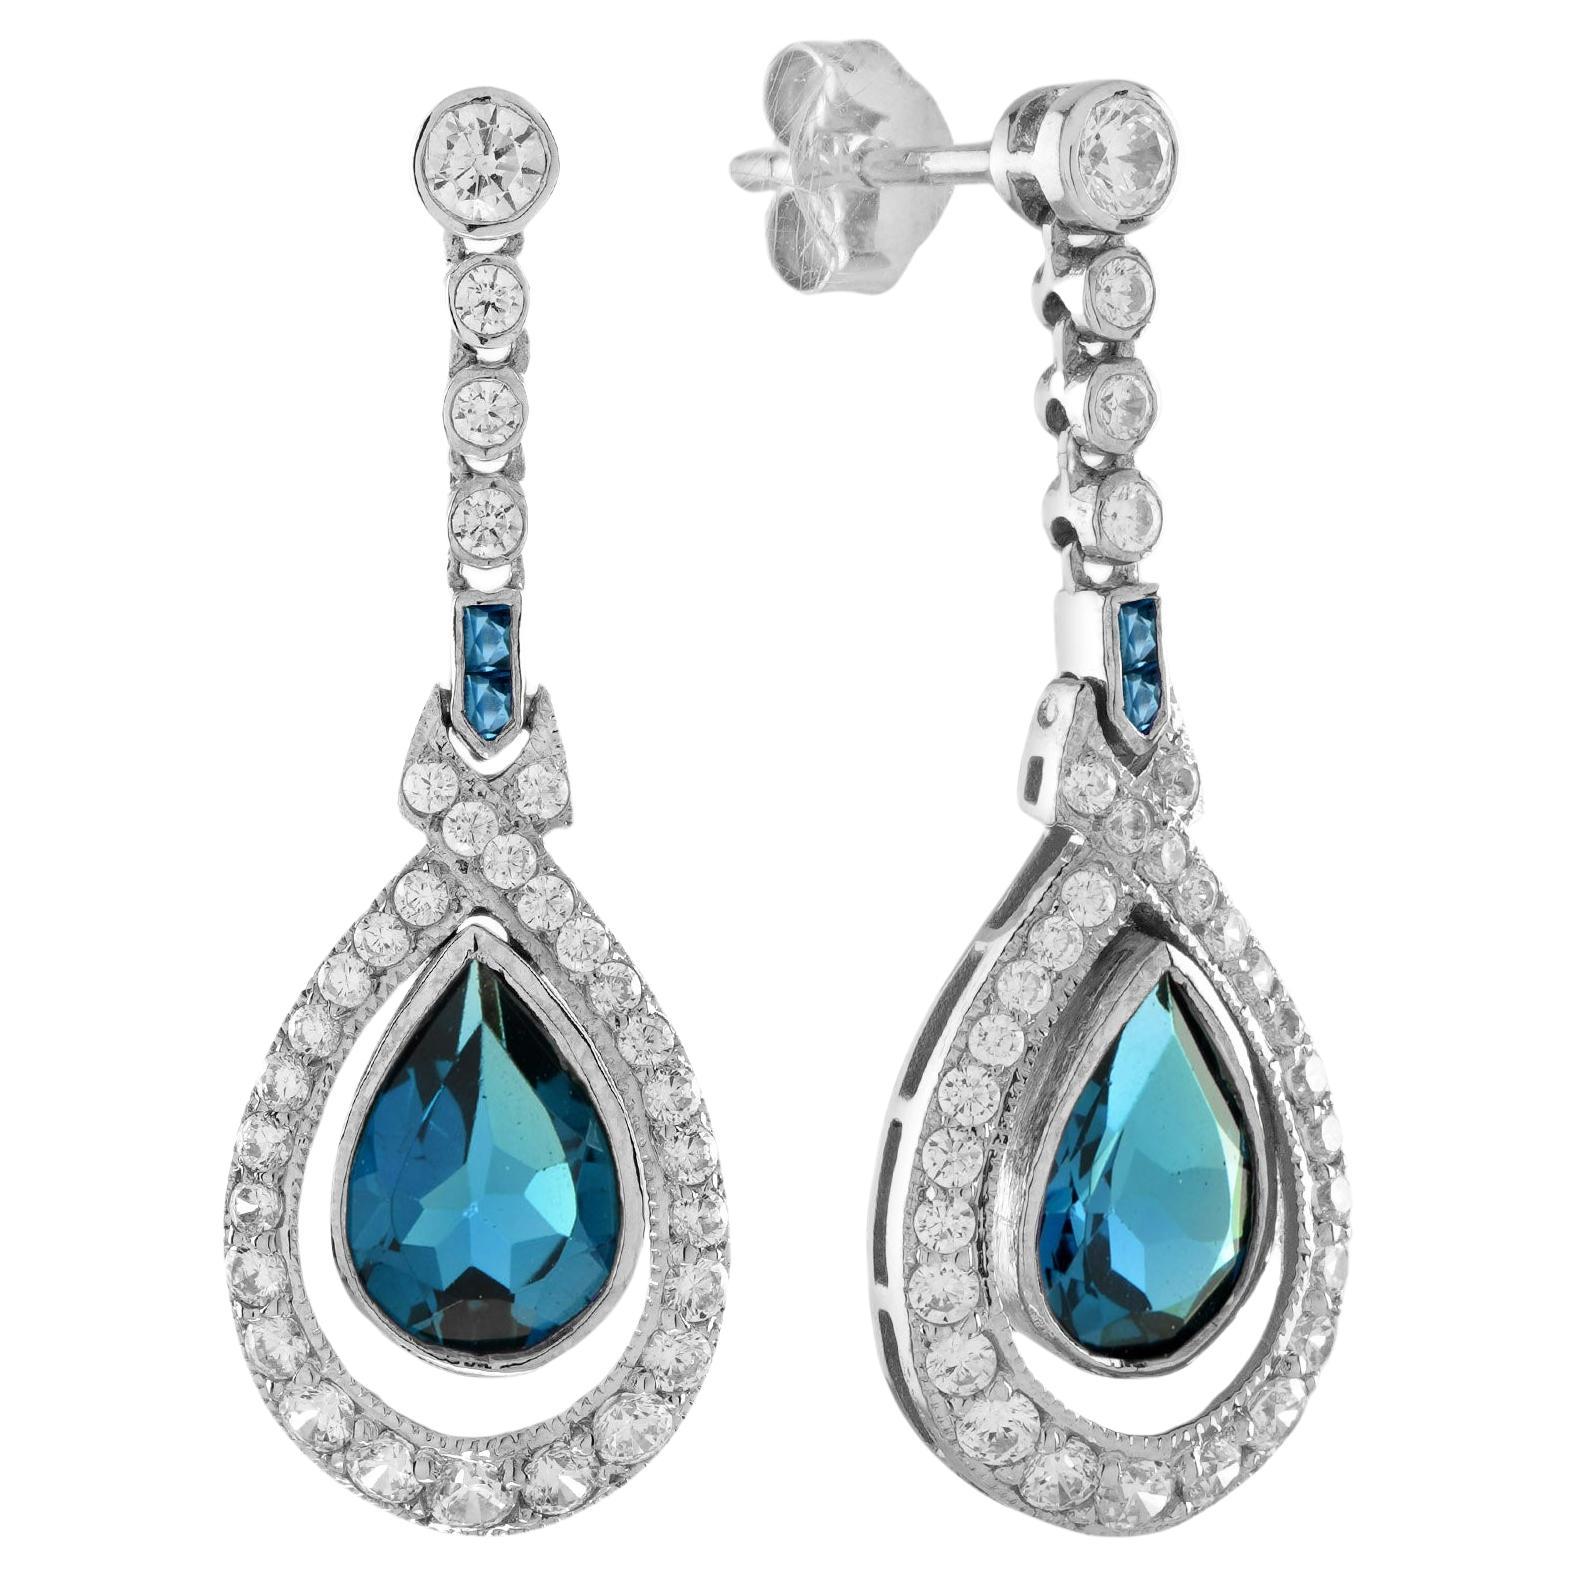 London Blue Topaz and Diamond Antique Style Drop Earrings in 18K White Gold